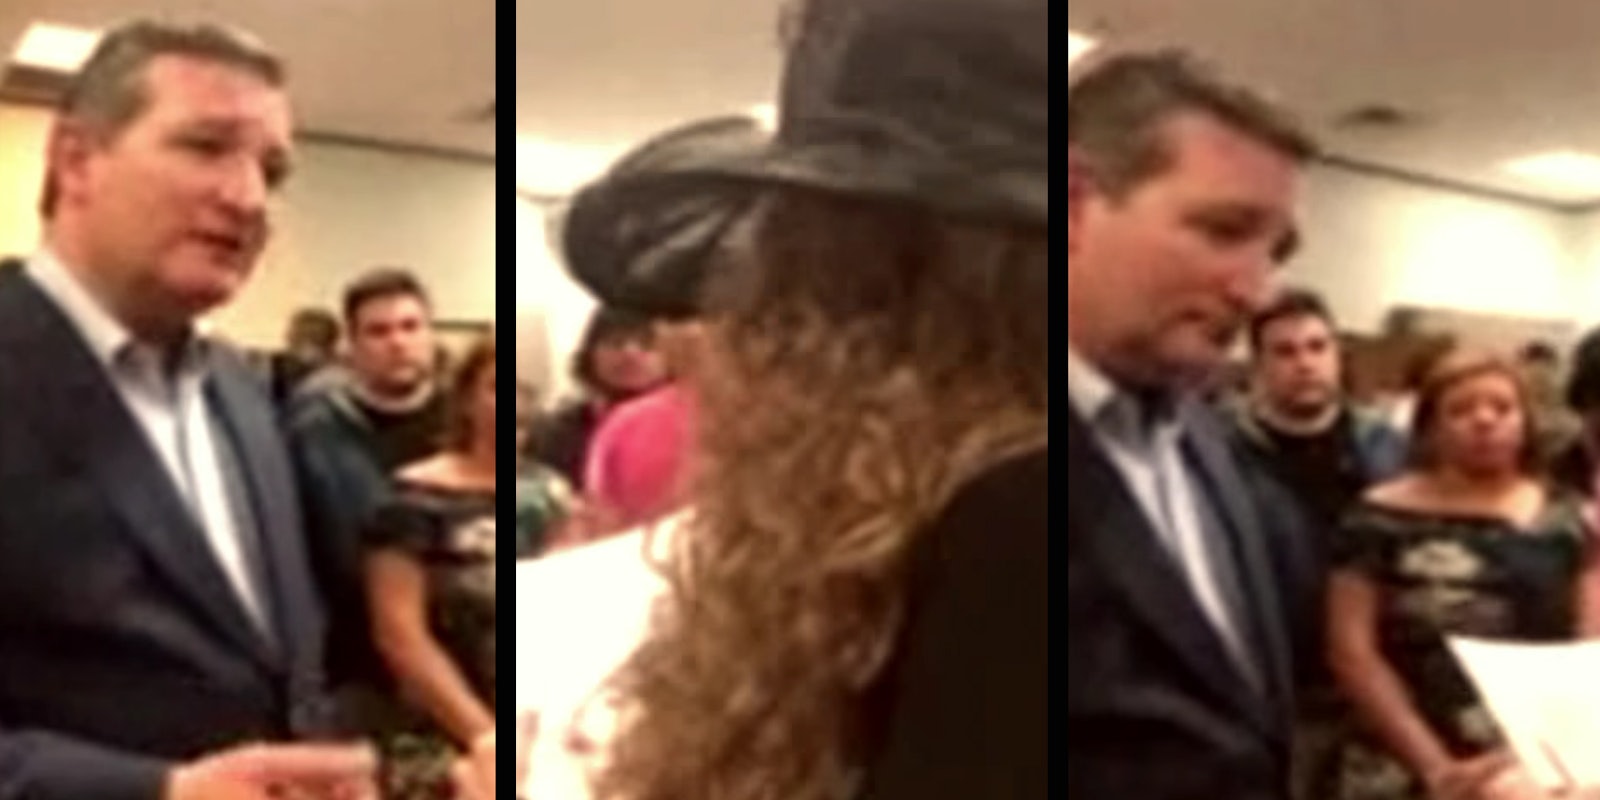 A woman asked Sen. Ted Cruz (R-Tx.) to take a DNA test to prove that he is human on Tuesday night. The exchange was posted on YouTube.